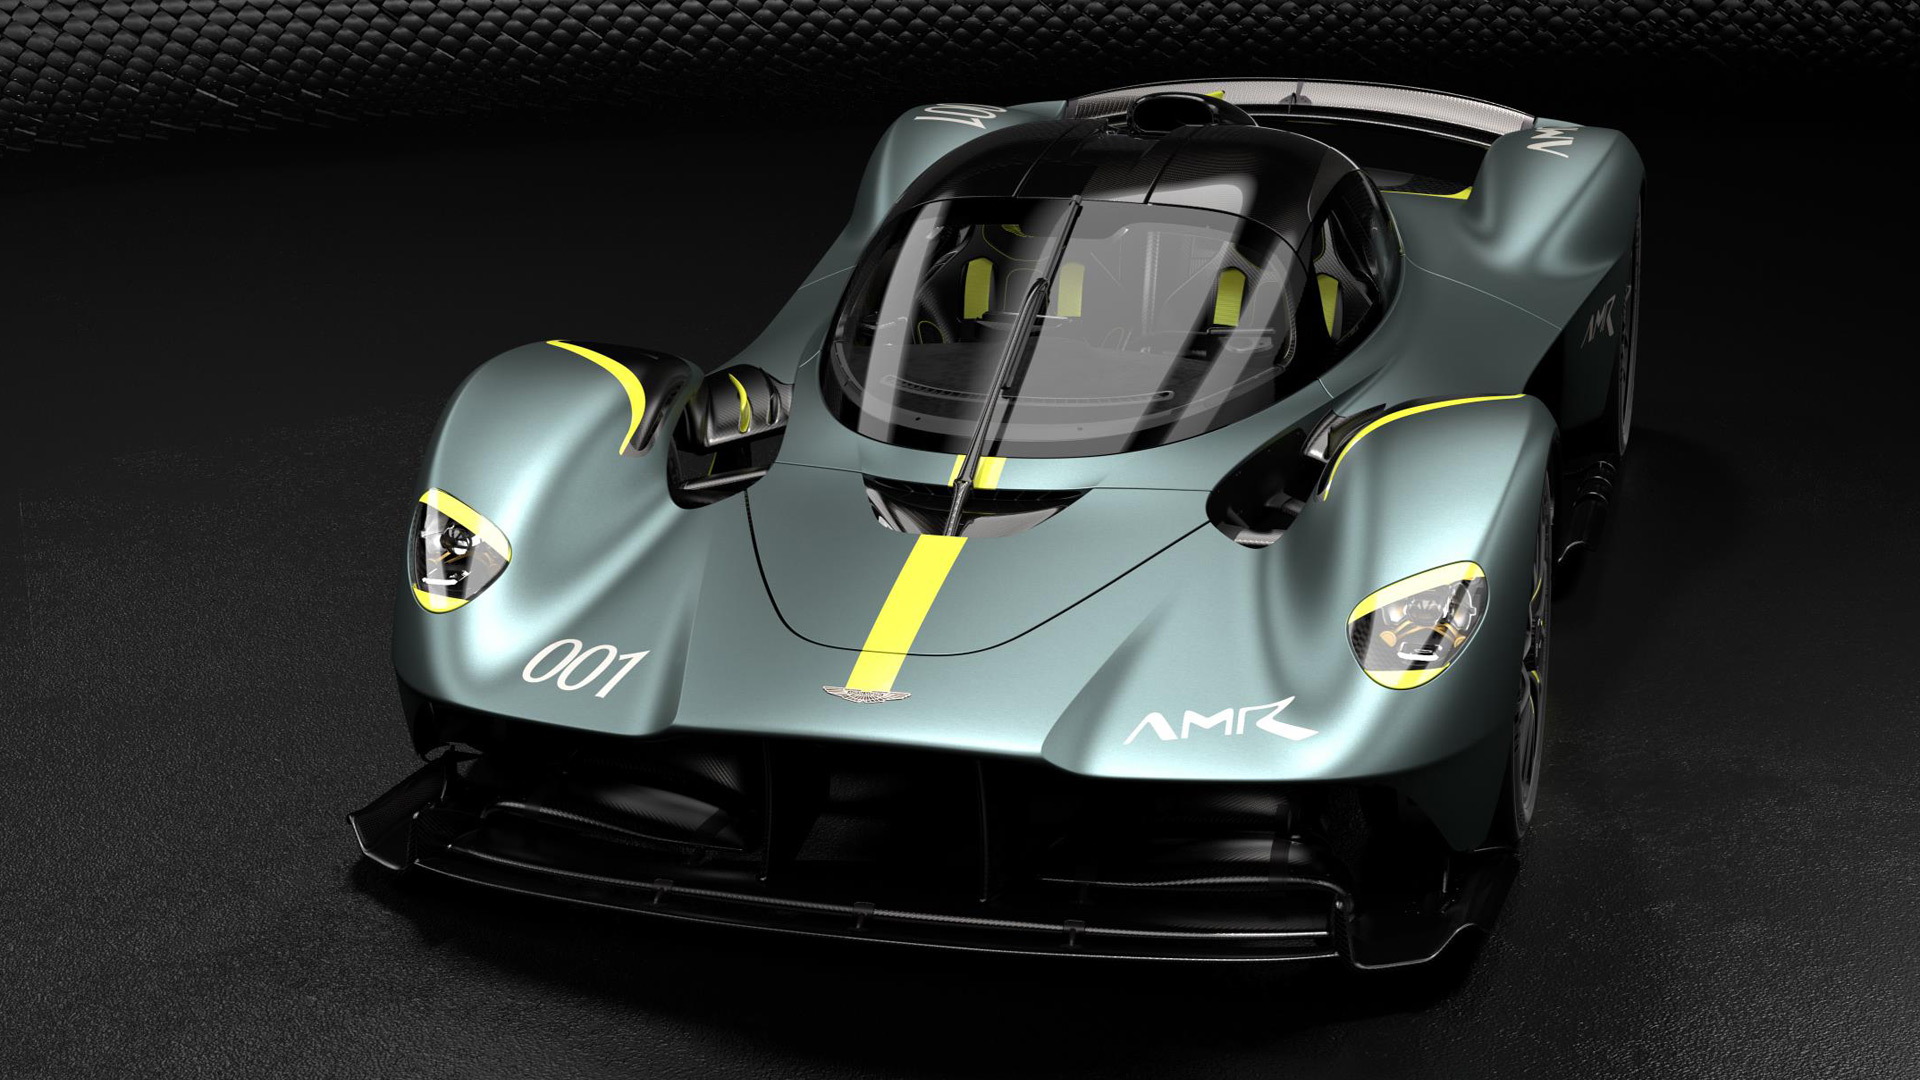 Aston Martin Valkyrie with AMR Track Performance Pack